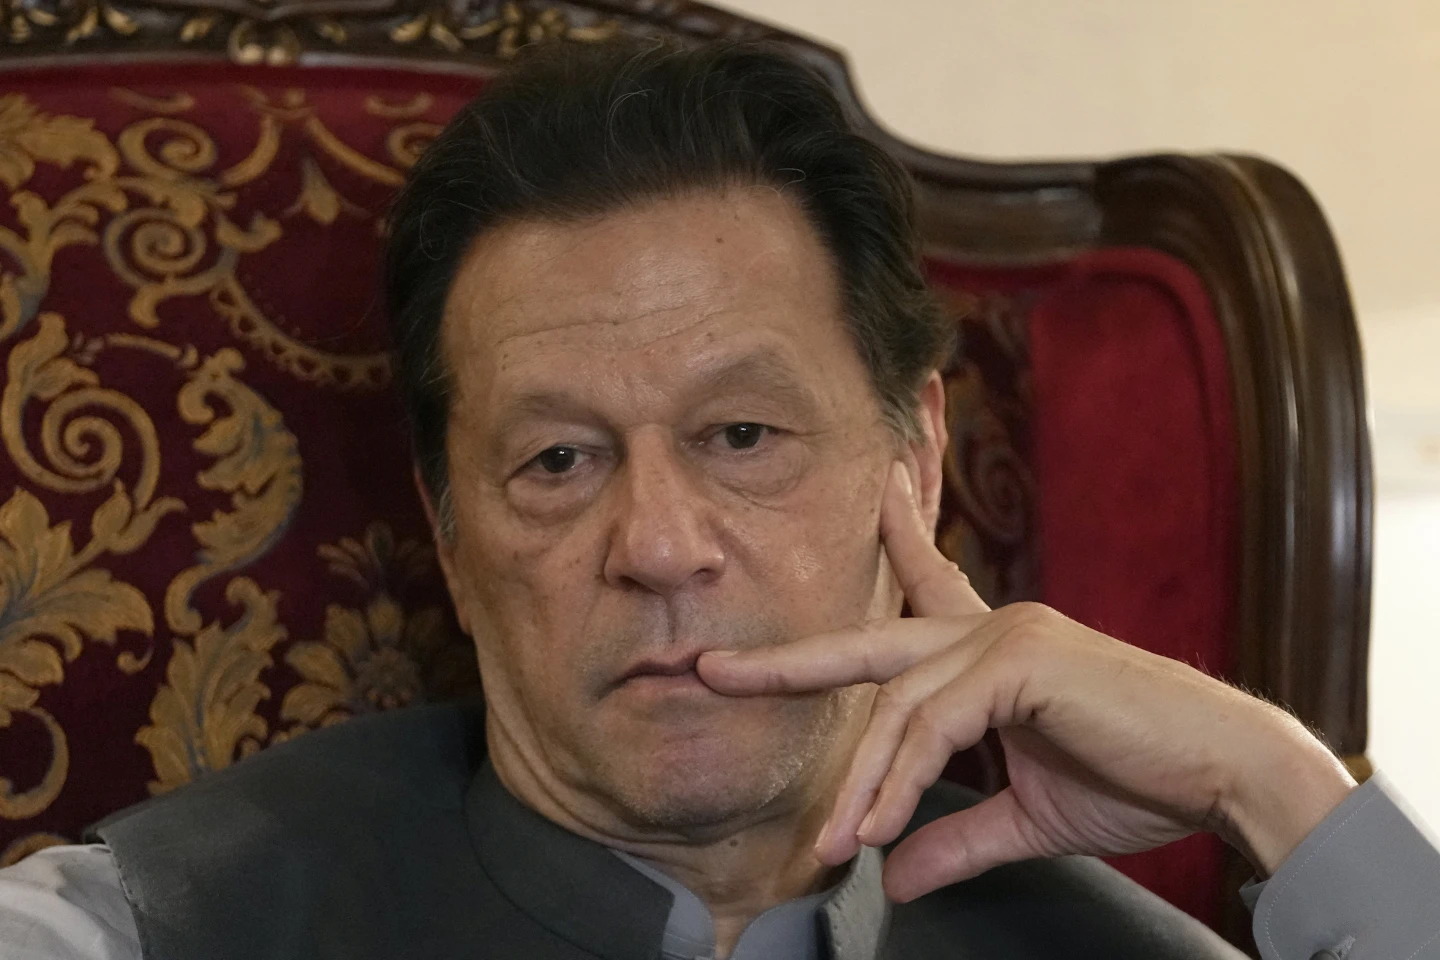 Former Pakistani Prime Minister Imran Khan Gets 10 Years in Prison Ahead of Elections